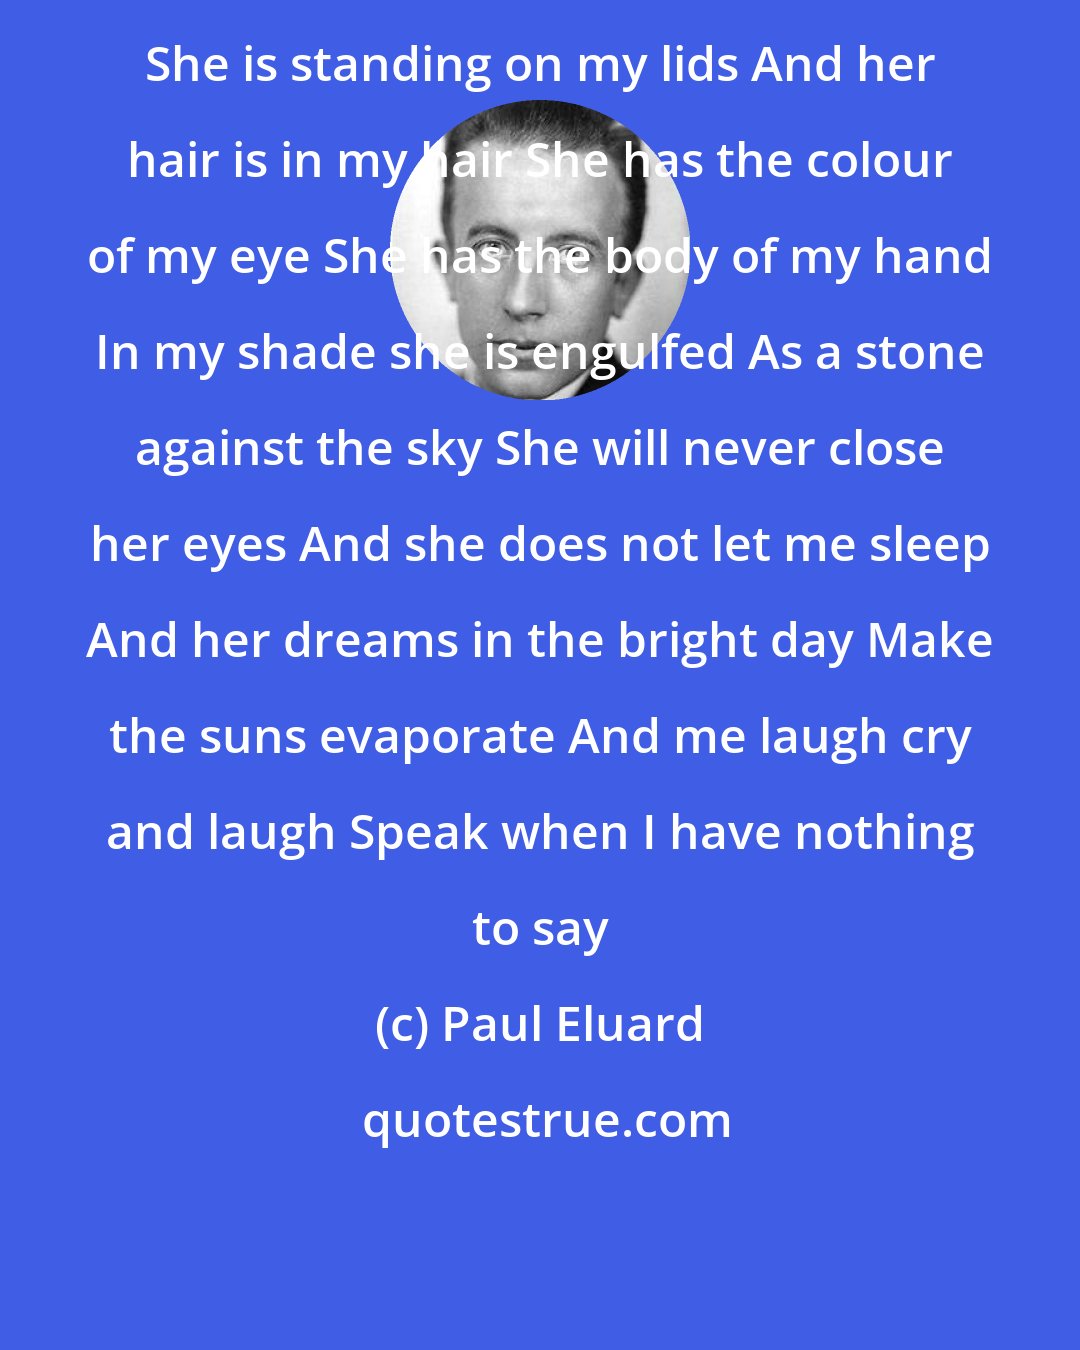 Paul Eluard: She is standing on my lids And her hair is in my hair She has the colour of my eye She has the body of my hand In my shade she is engulfed As a stone against the sky She will never close her eyes And she does not let me sleep And her dreams in the bright day Make the suns evaporate And me laugh cry and laugh Speak when I have nothing to say